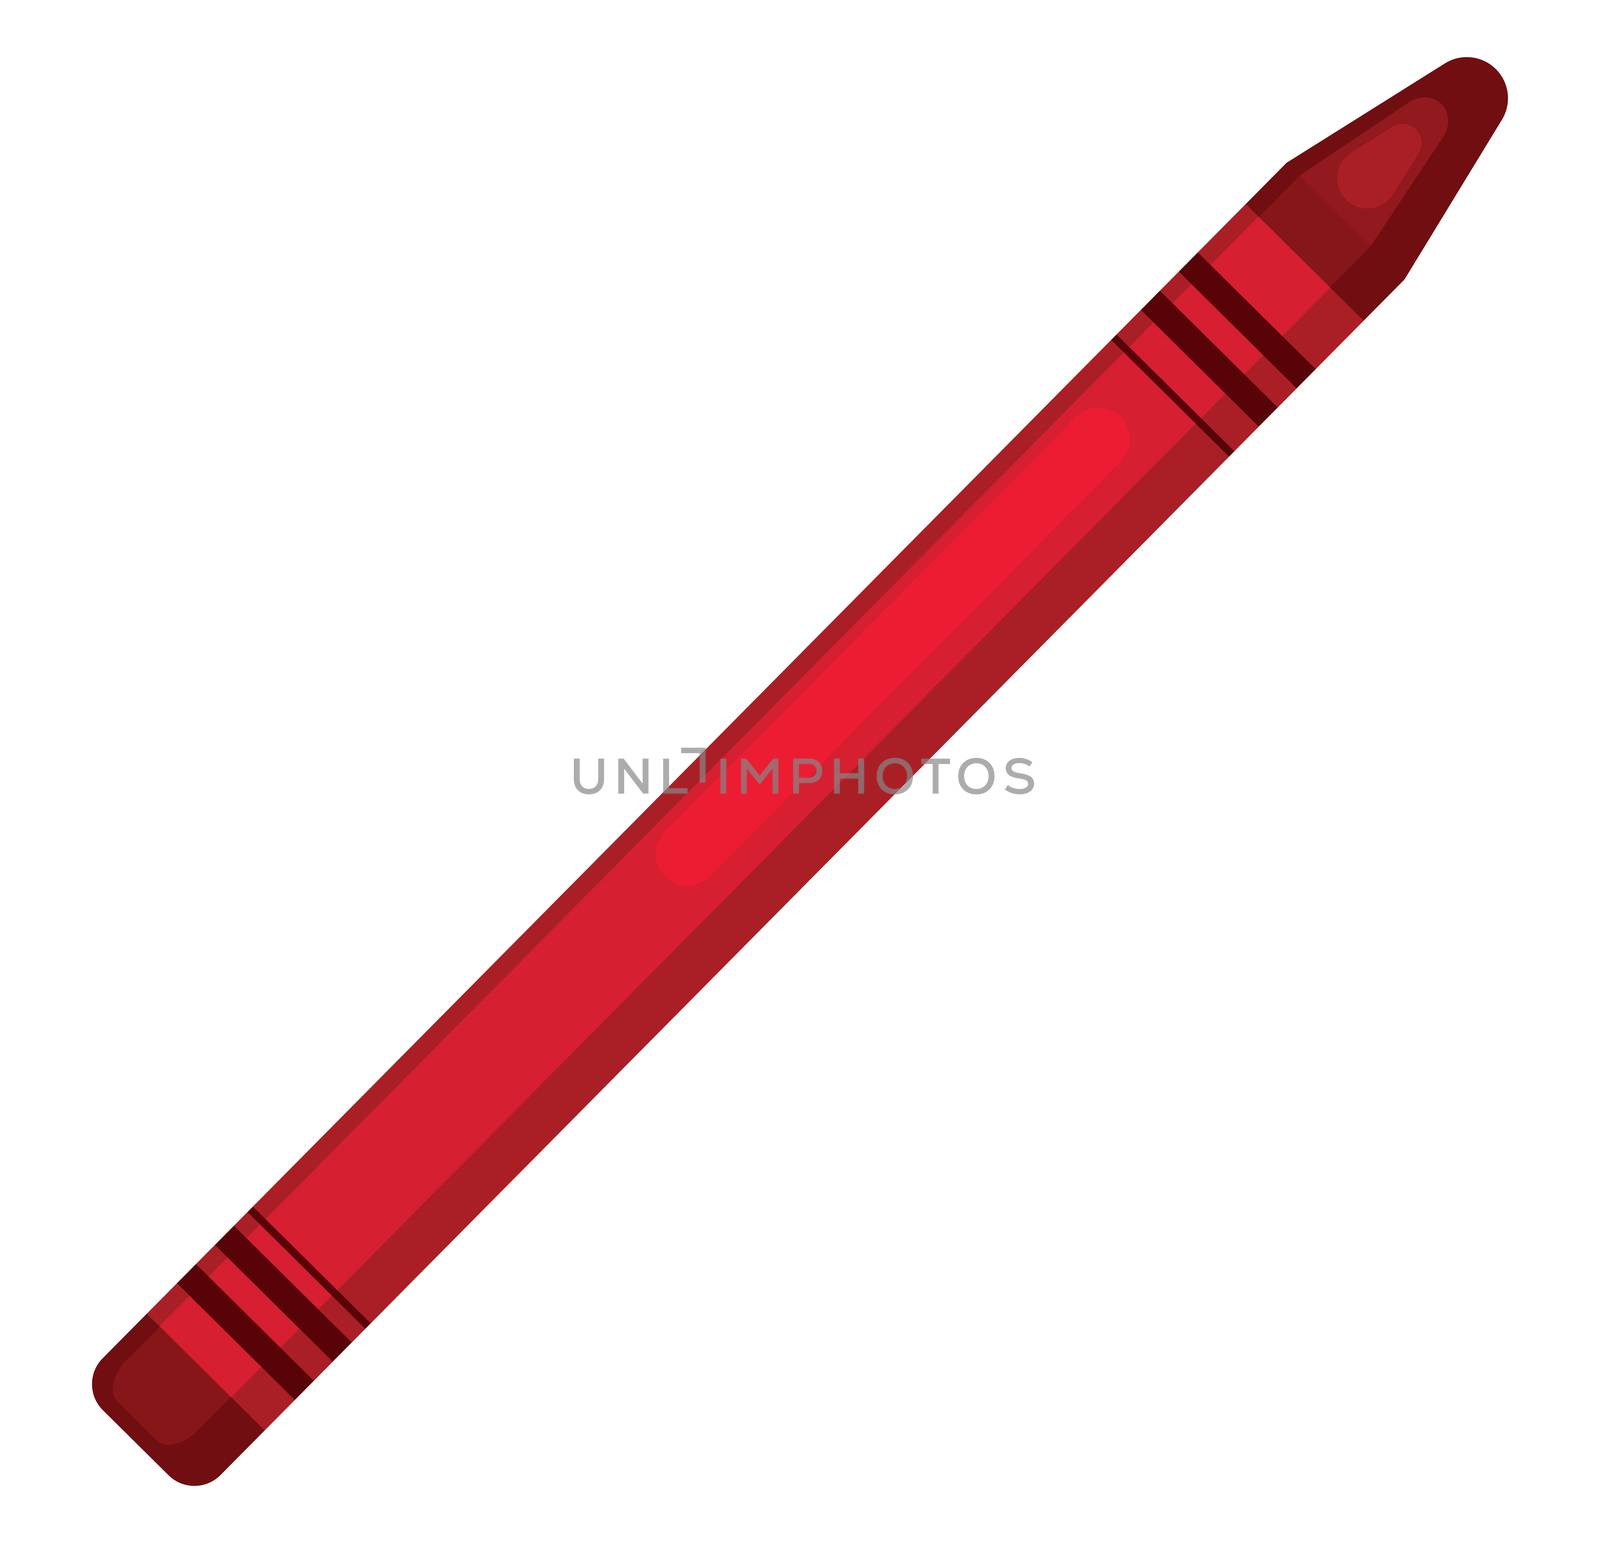 Red crayon , illustration, vector on white background